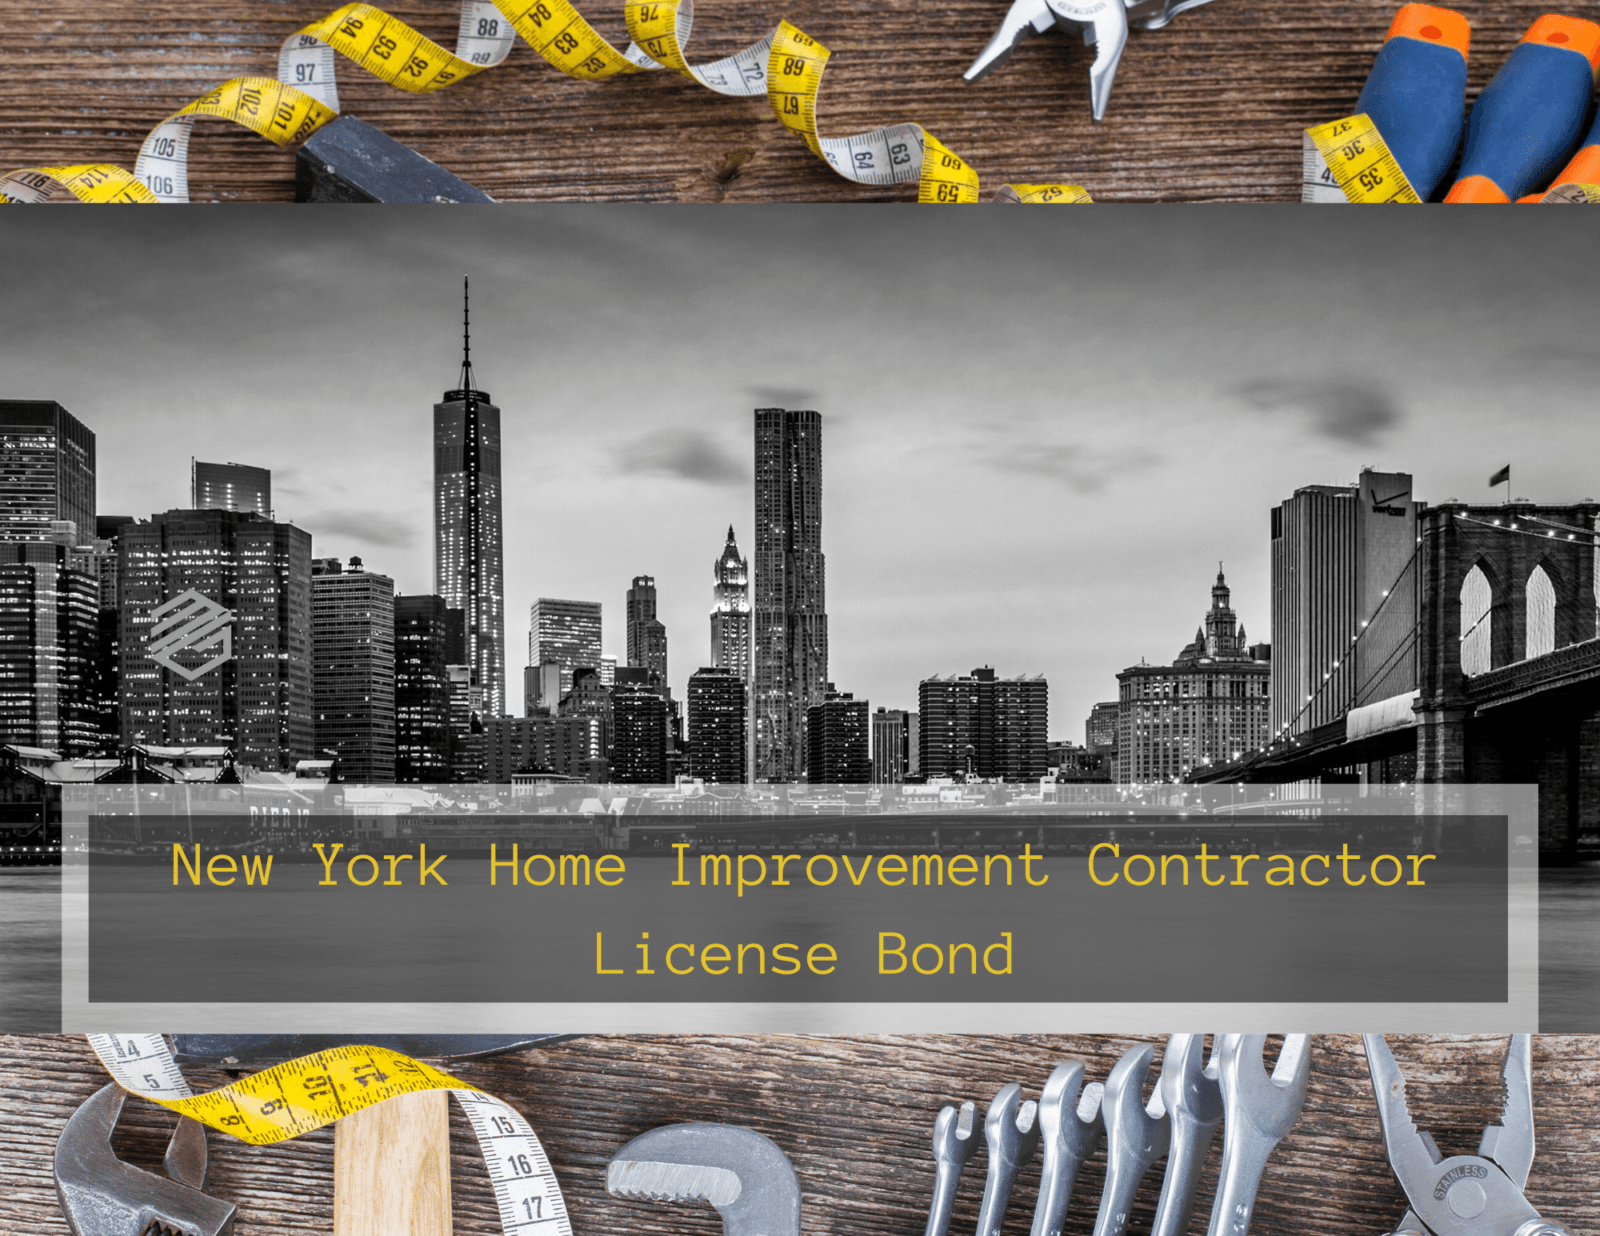 New York Home Improvement Contractor License Bonds - New York Skyline in black and white with handyman tools bordering the top and bottom in color. Words New York Home Improvement Contractor License Bond in Yellow